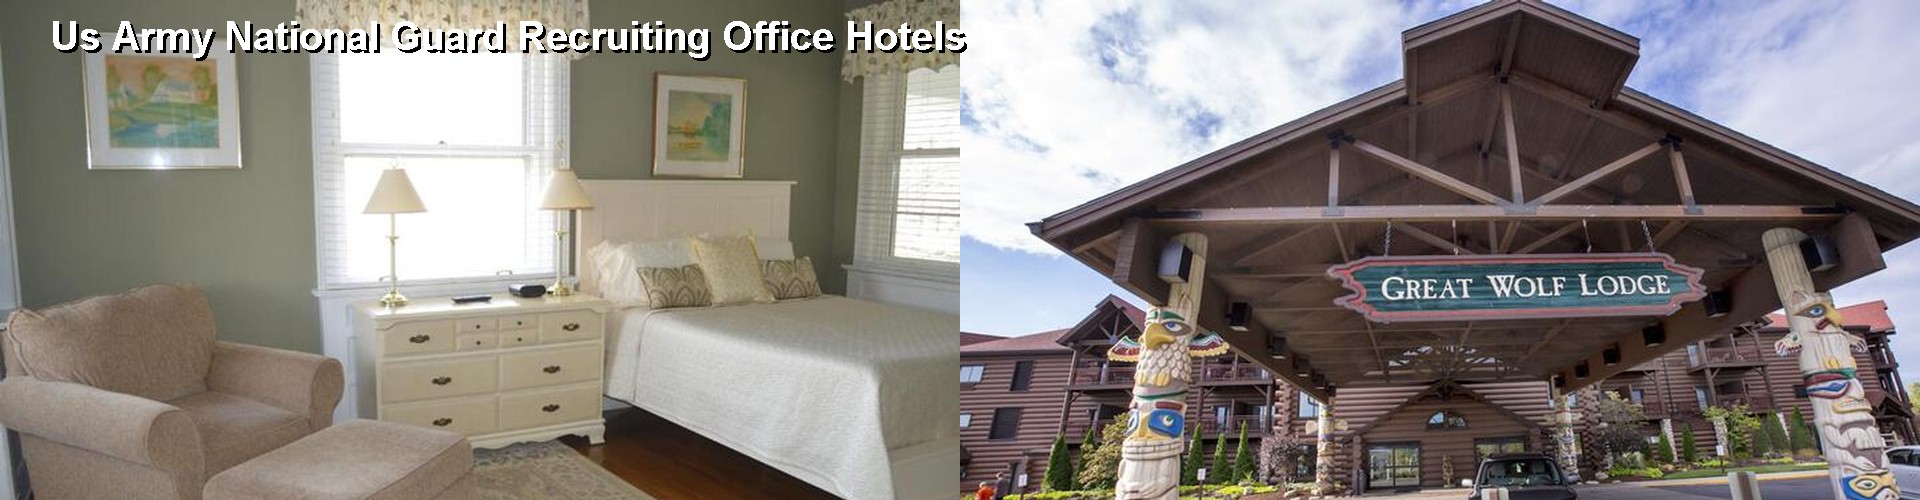 5 Best Hotels near Us Army National Guard Recruiting Office